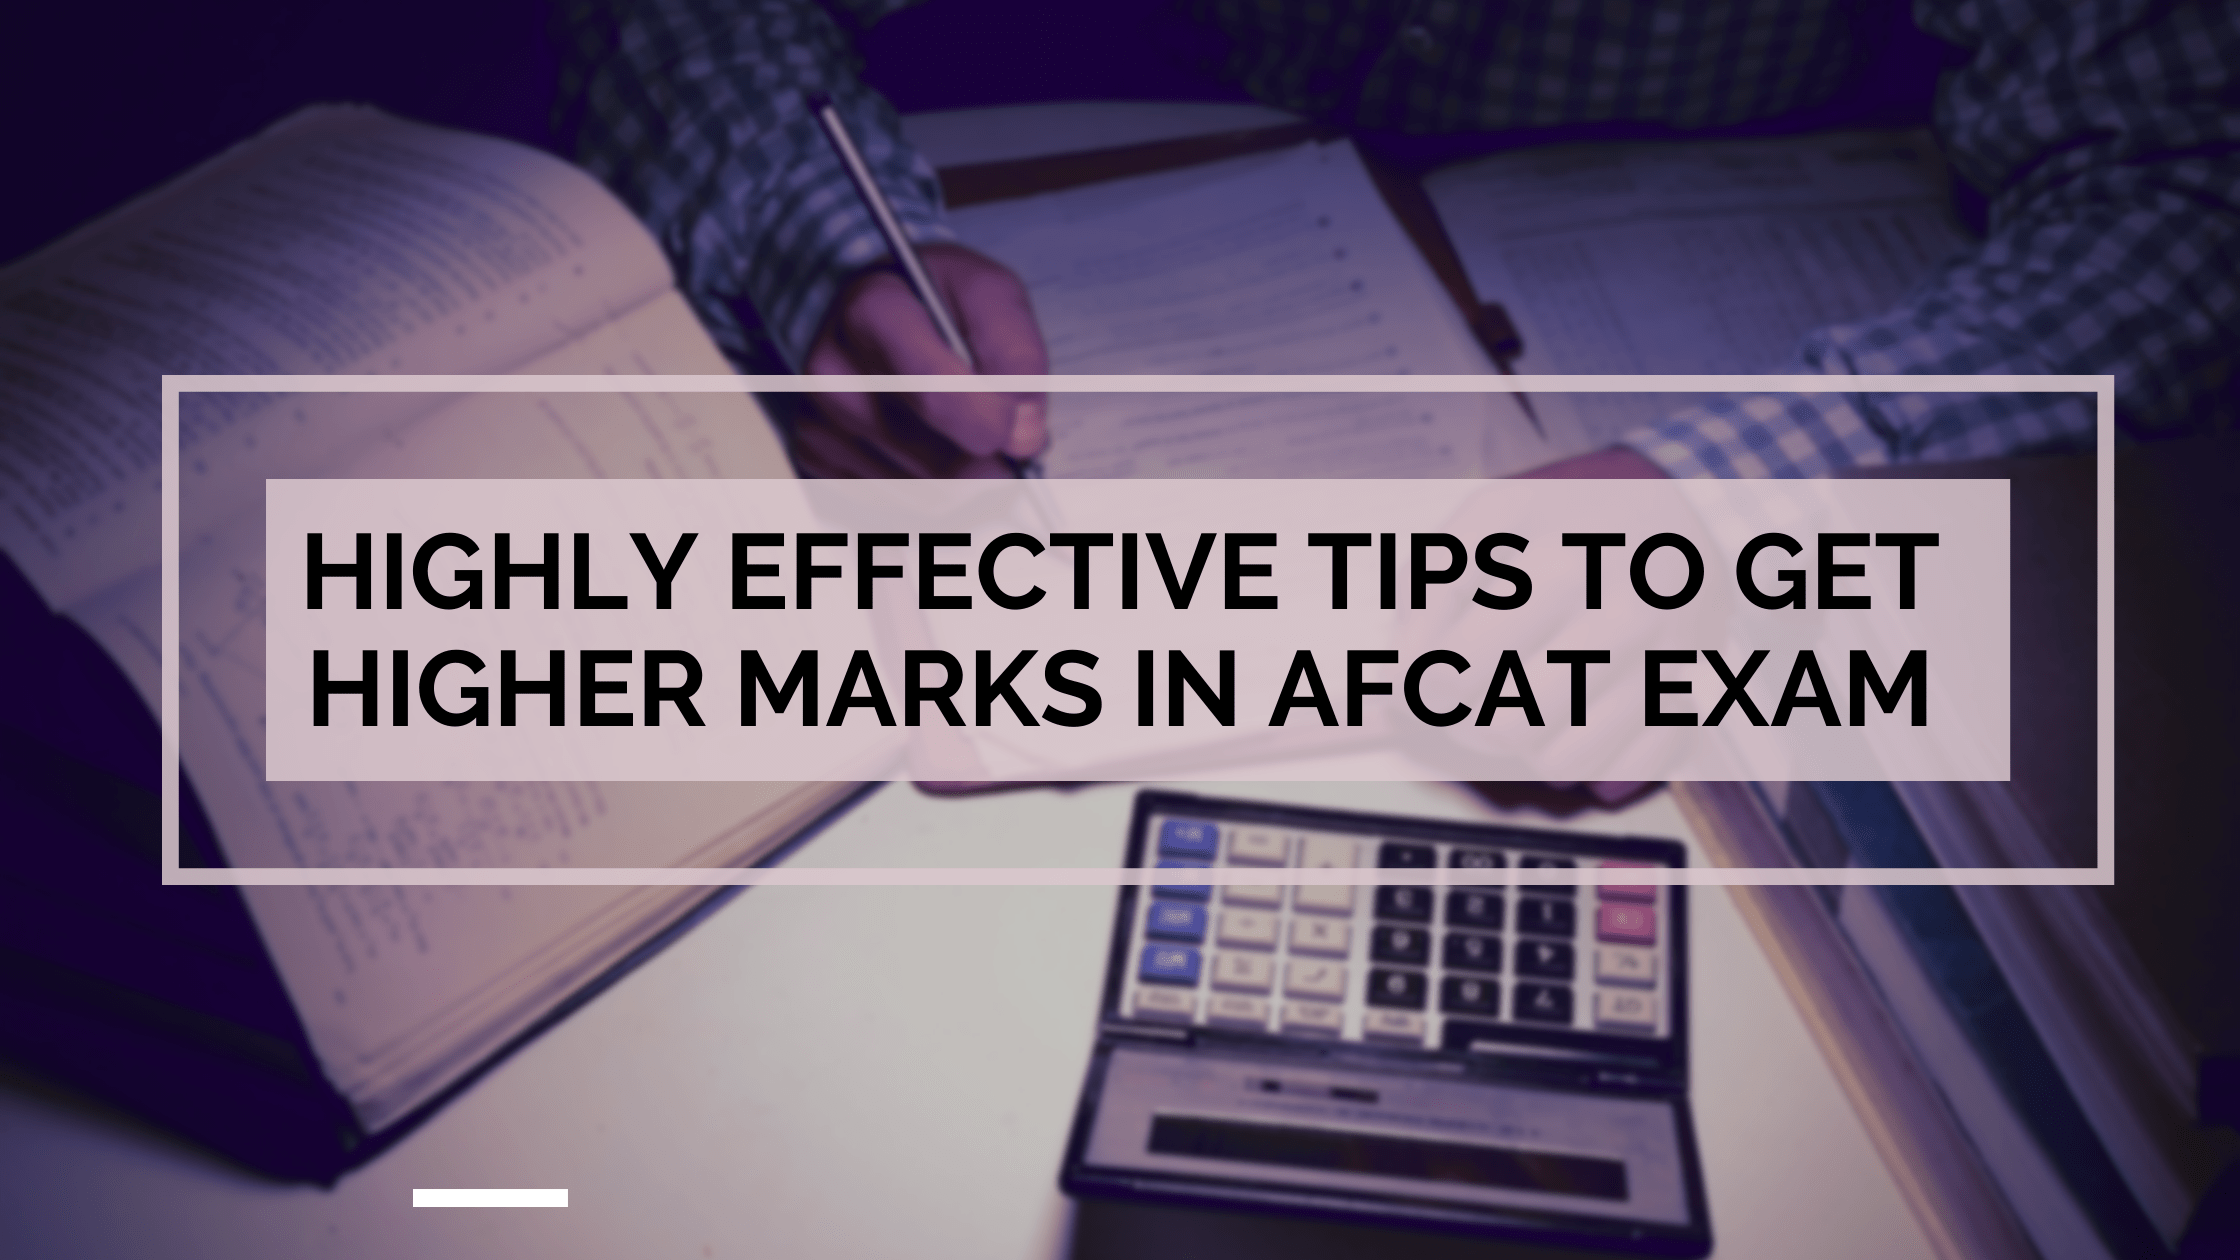 Highly Effective Tips To Get Higher Marks In AFCAT Exam